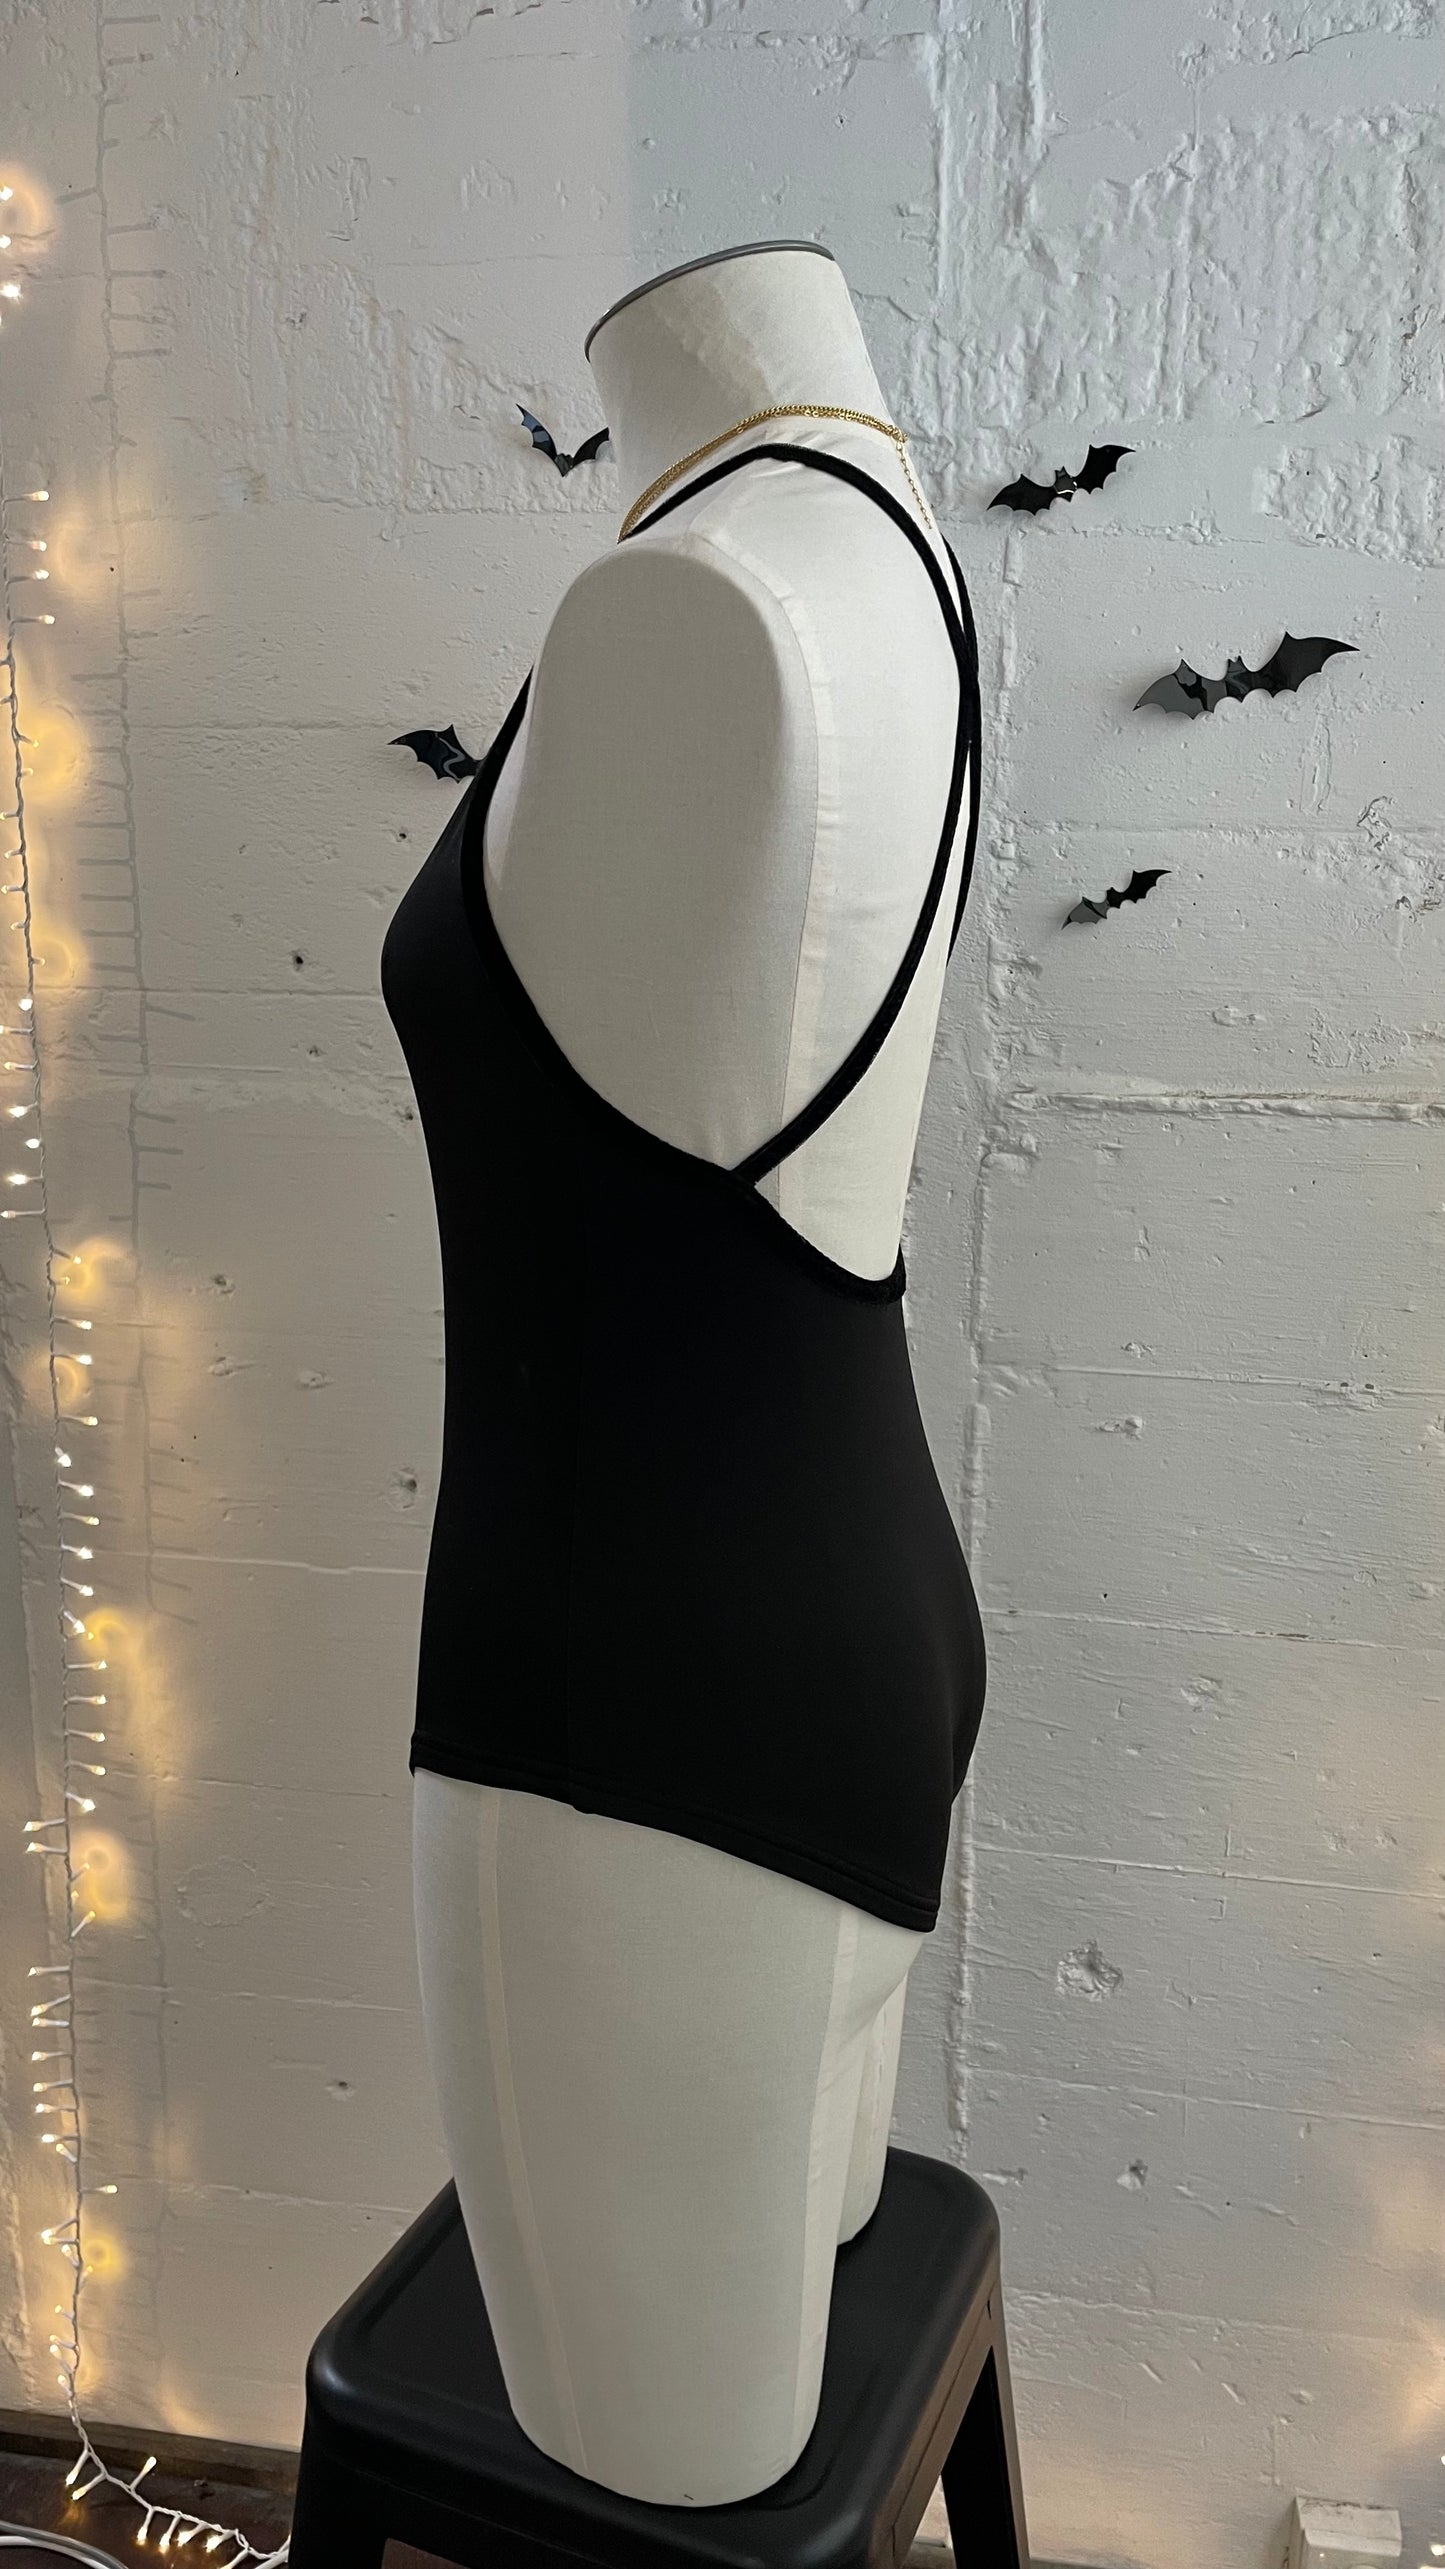 Backless one piece / M / Black with velvet binding